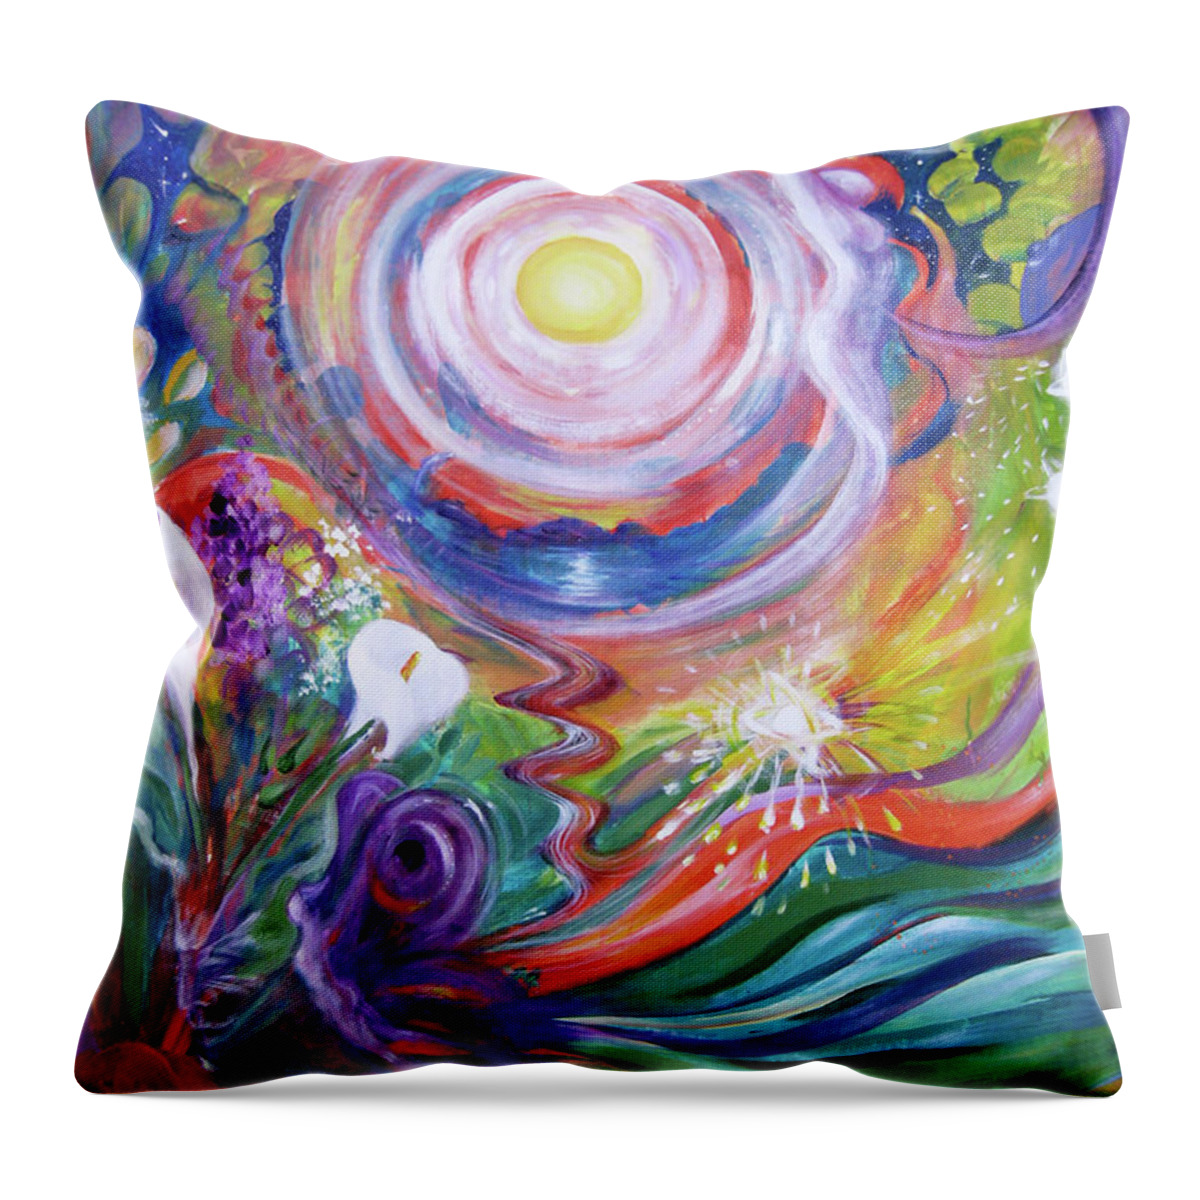 Masks Throw Pillow featuring the mixed media Lush Life by Sofanya White